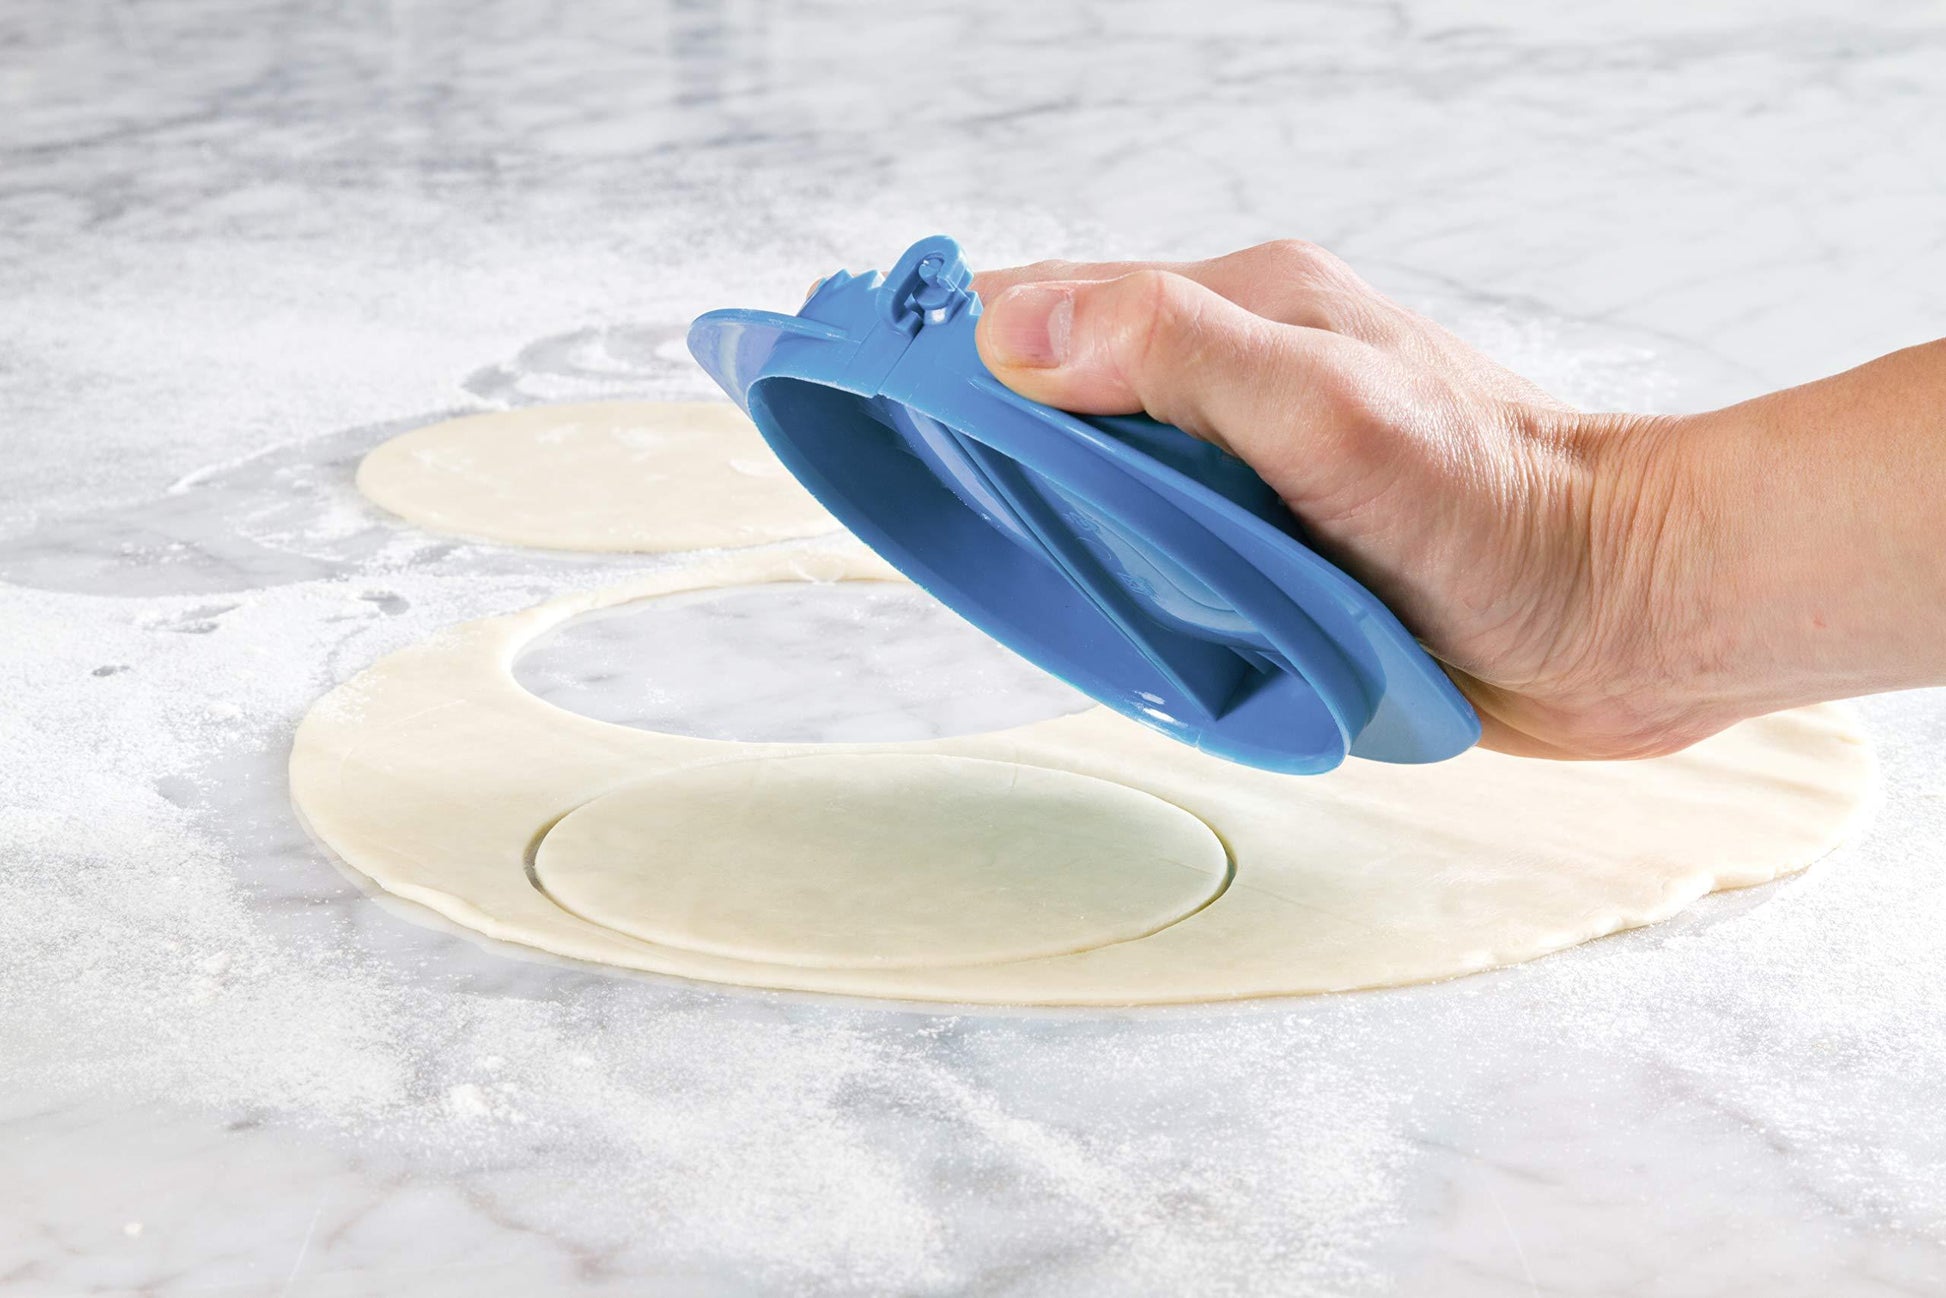 Prepworks Multifunctional Dough Press, Set of 3 Sizes Included - 4 inch/5 inch/6 inch - CookCave